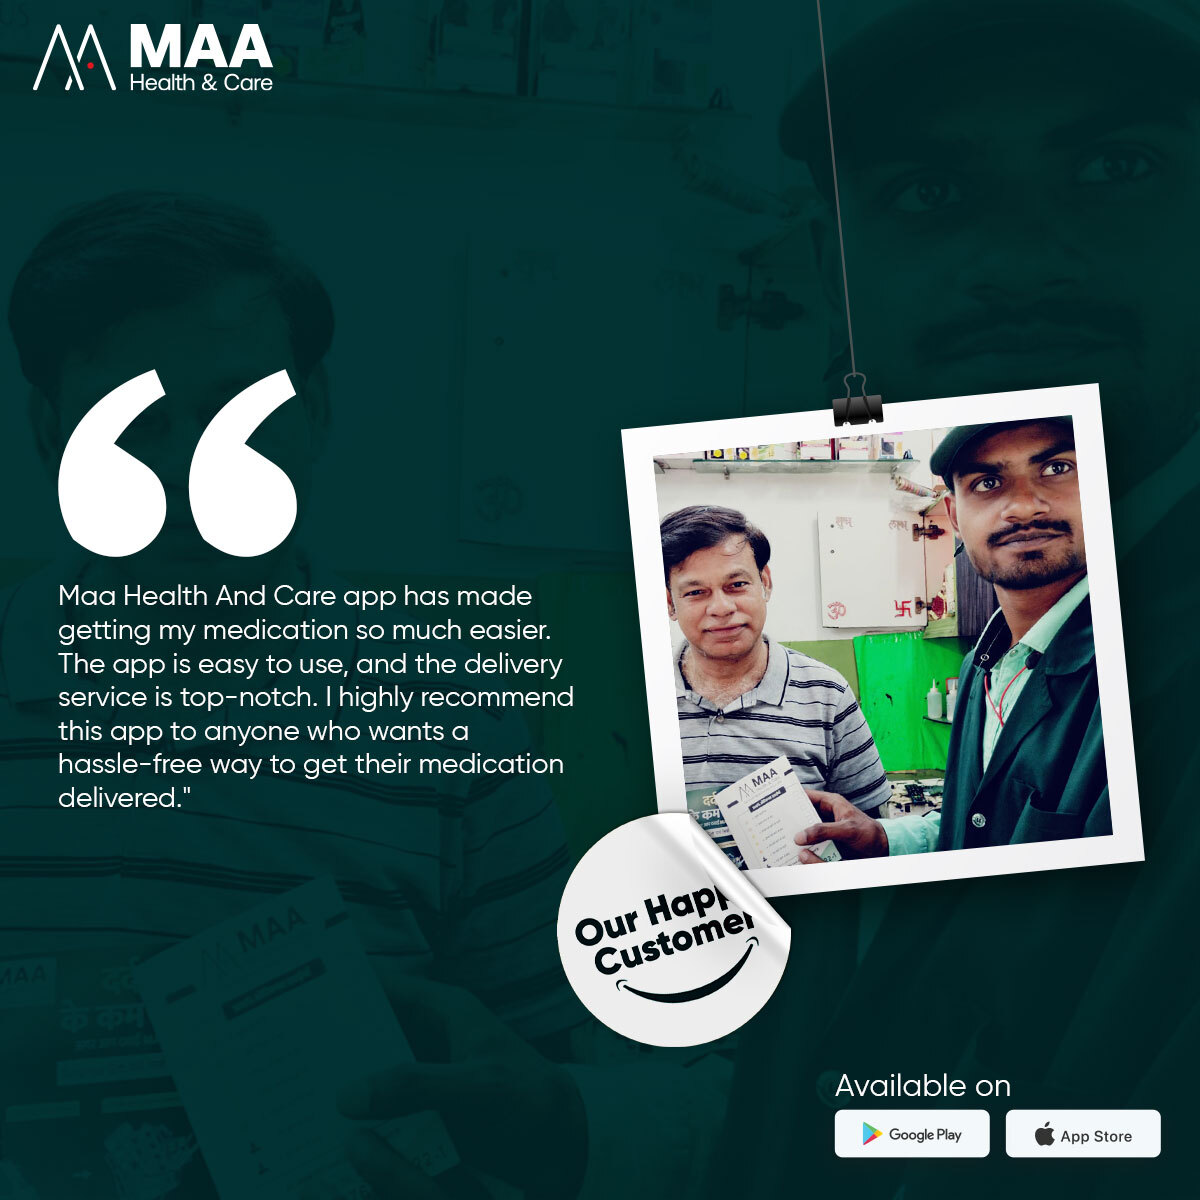 Your satisfaction with our service is our top priority.✌
.
.
#MaaHealthAndCare #HealthcareApp #DigitalHealth #HealthTech #MobileHealth #PersonalizedHealthcare #Telemedicine #VirtualHealth #HealthAwareness #customerreviews #HappyCustomers #HealthcareReviews #AppReviews #Health